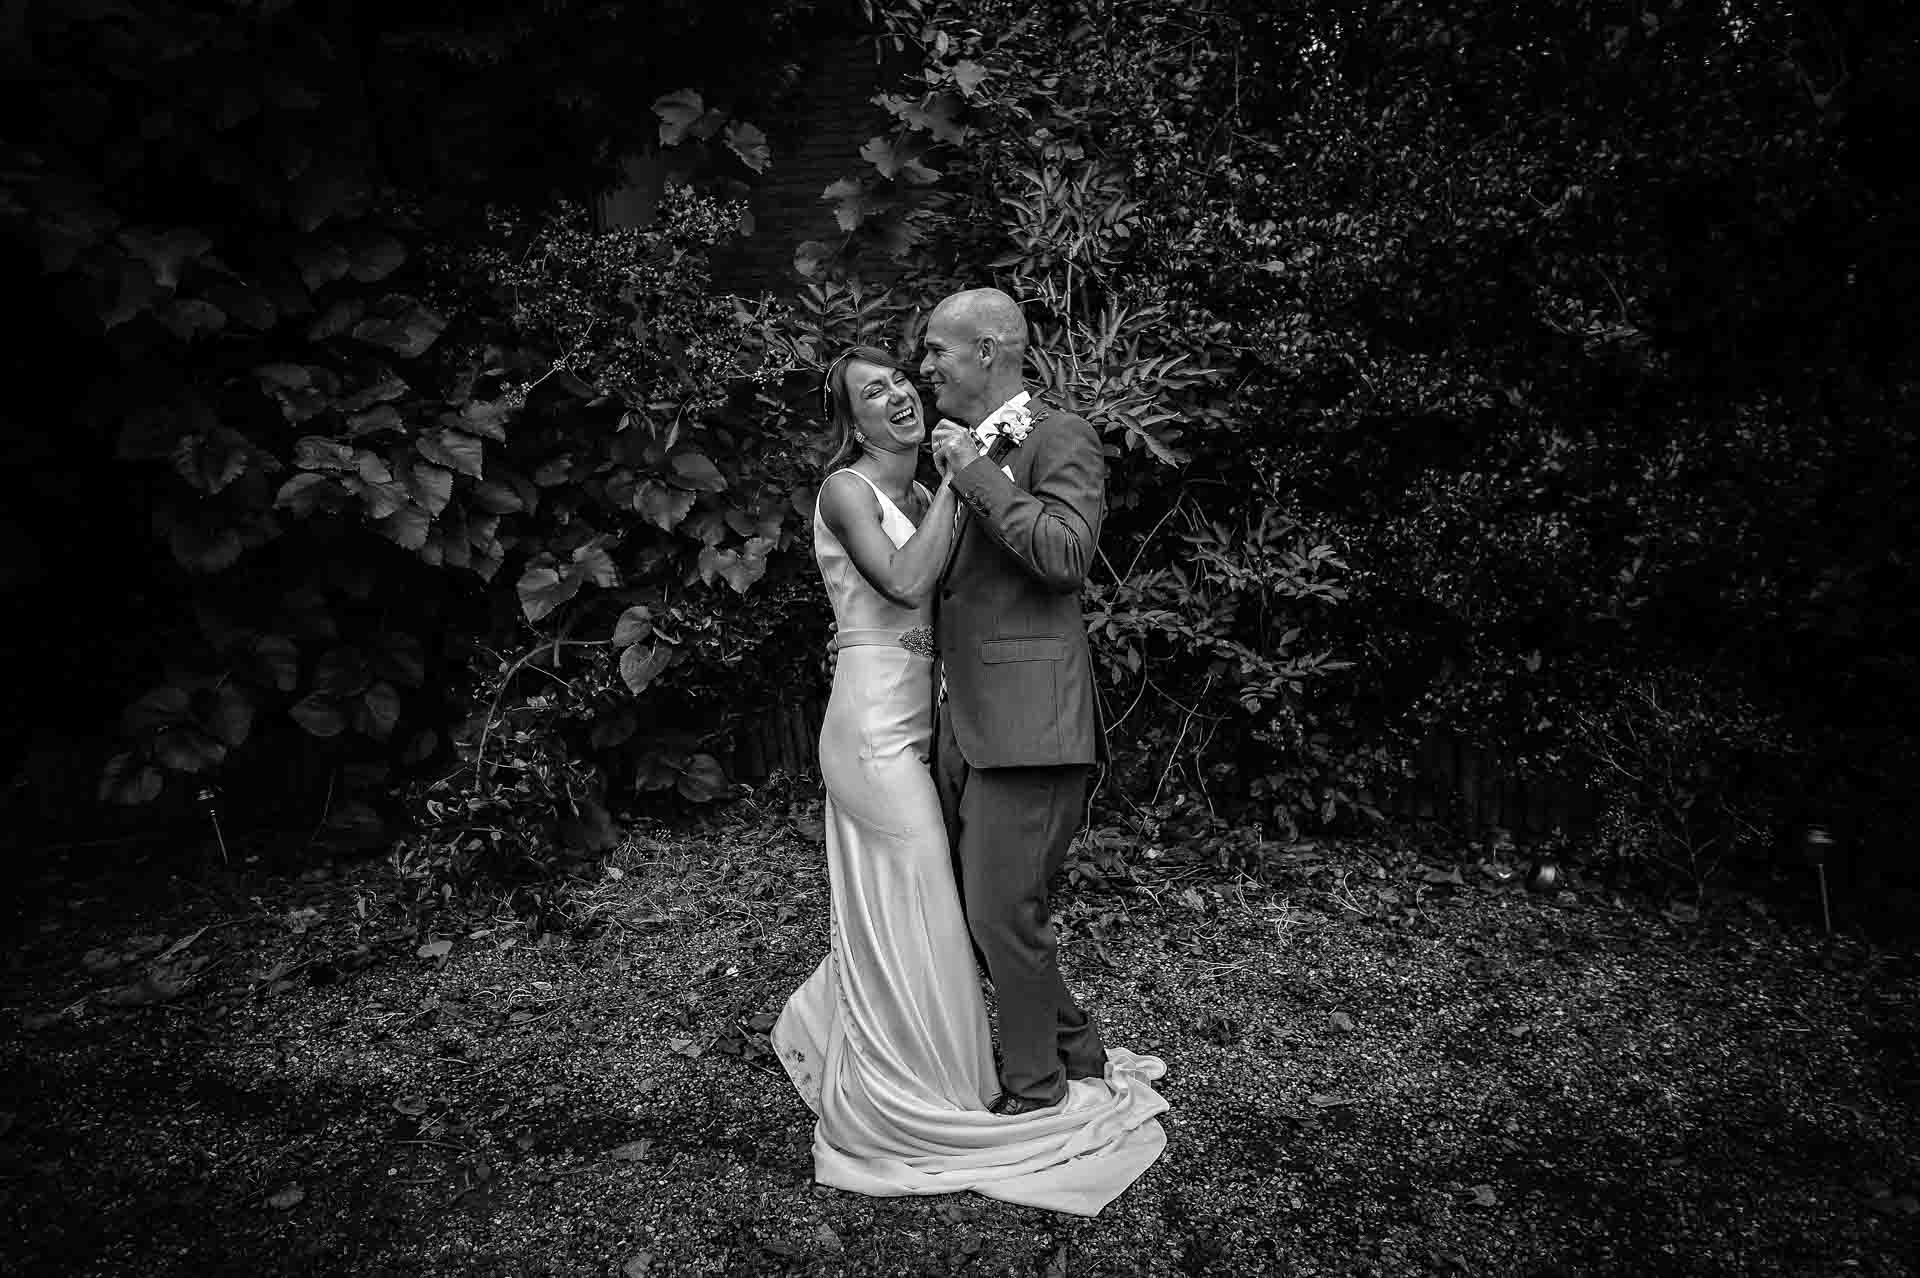 Newly-weds in garden dancing with each other in black and white